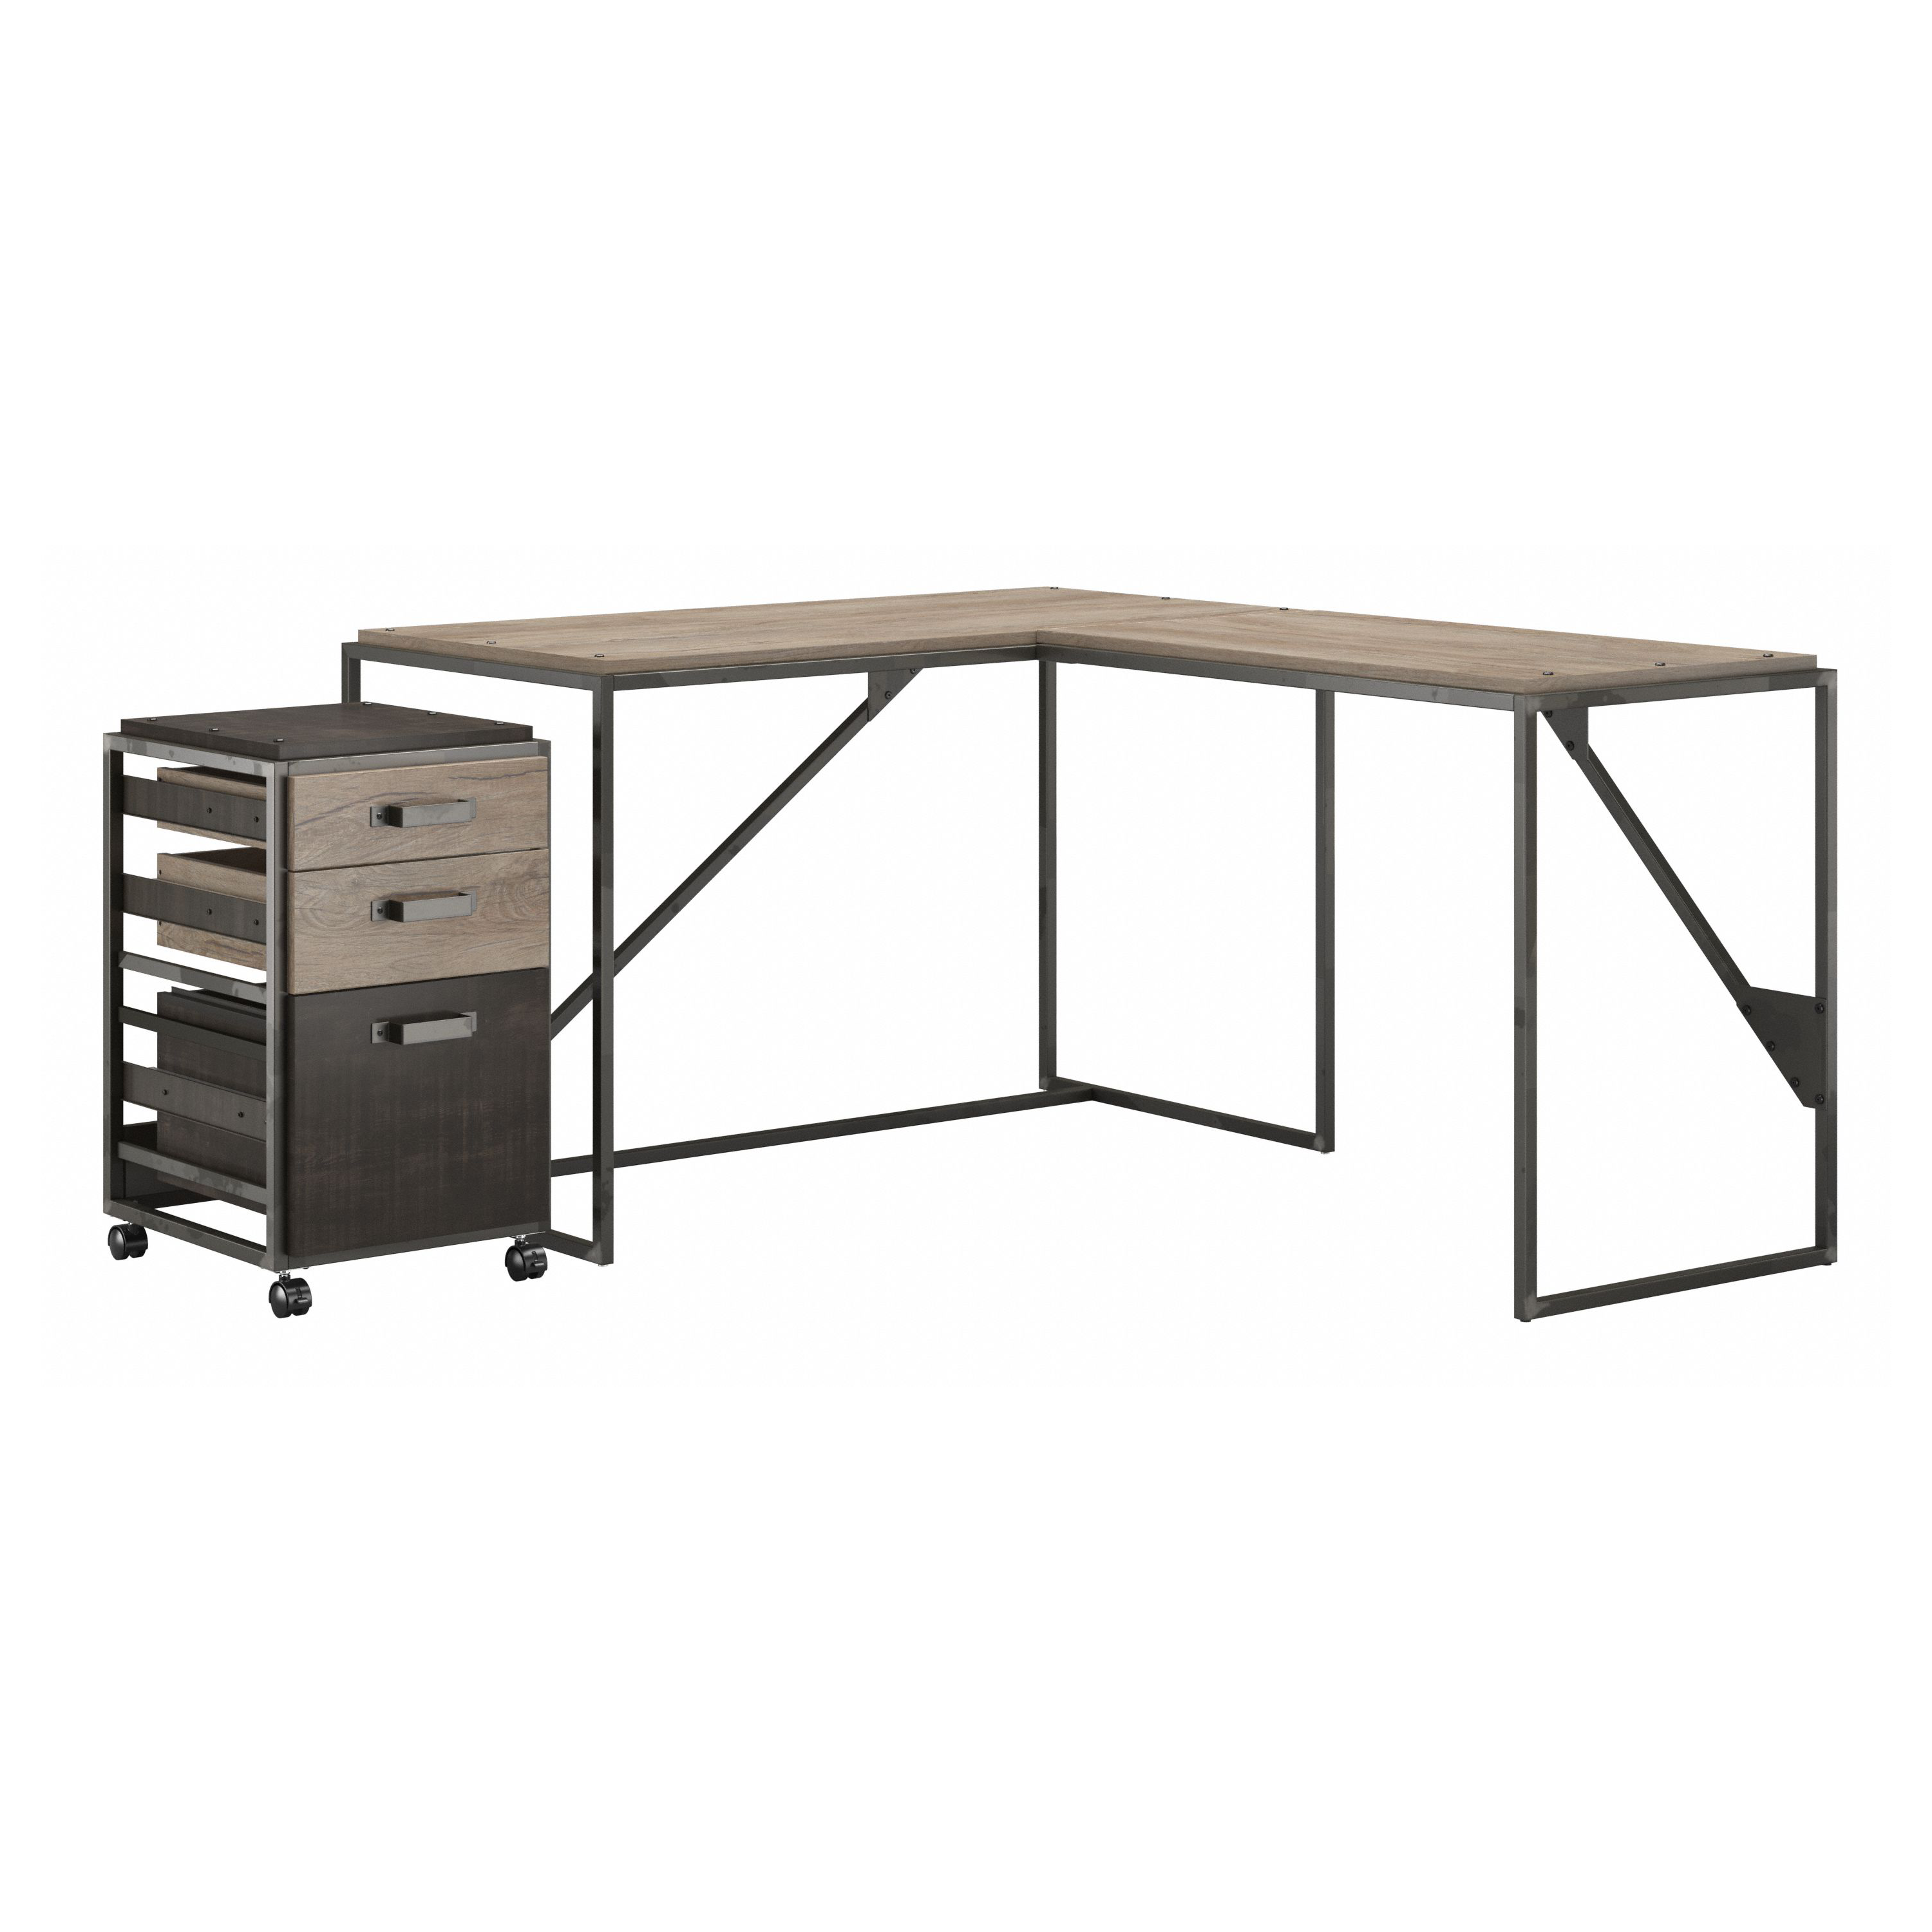 Shop Bush Furniture Refinery 50W L Shaped Industrial Desk with 3 Drawer Mobile File Cabinet 02 RFY004RG #color_rustic gray/charred wood